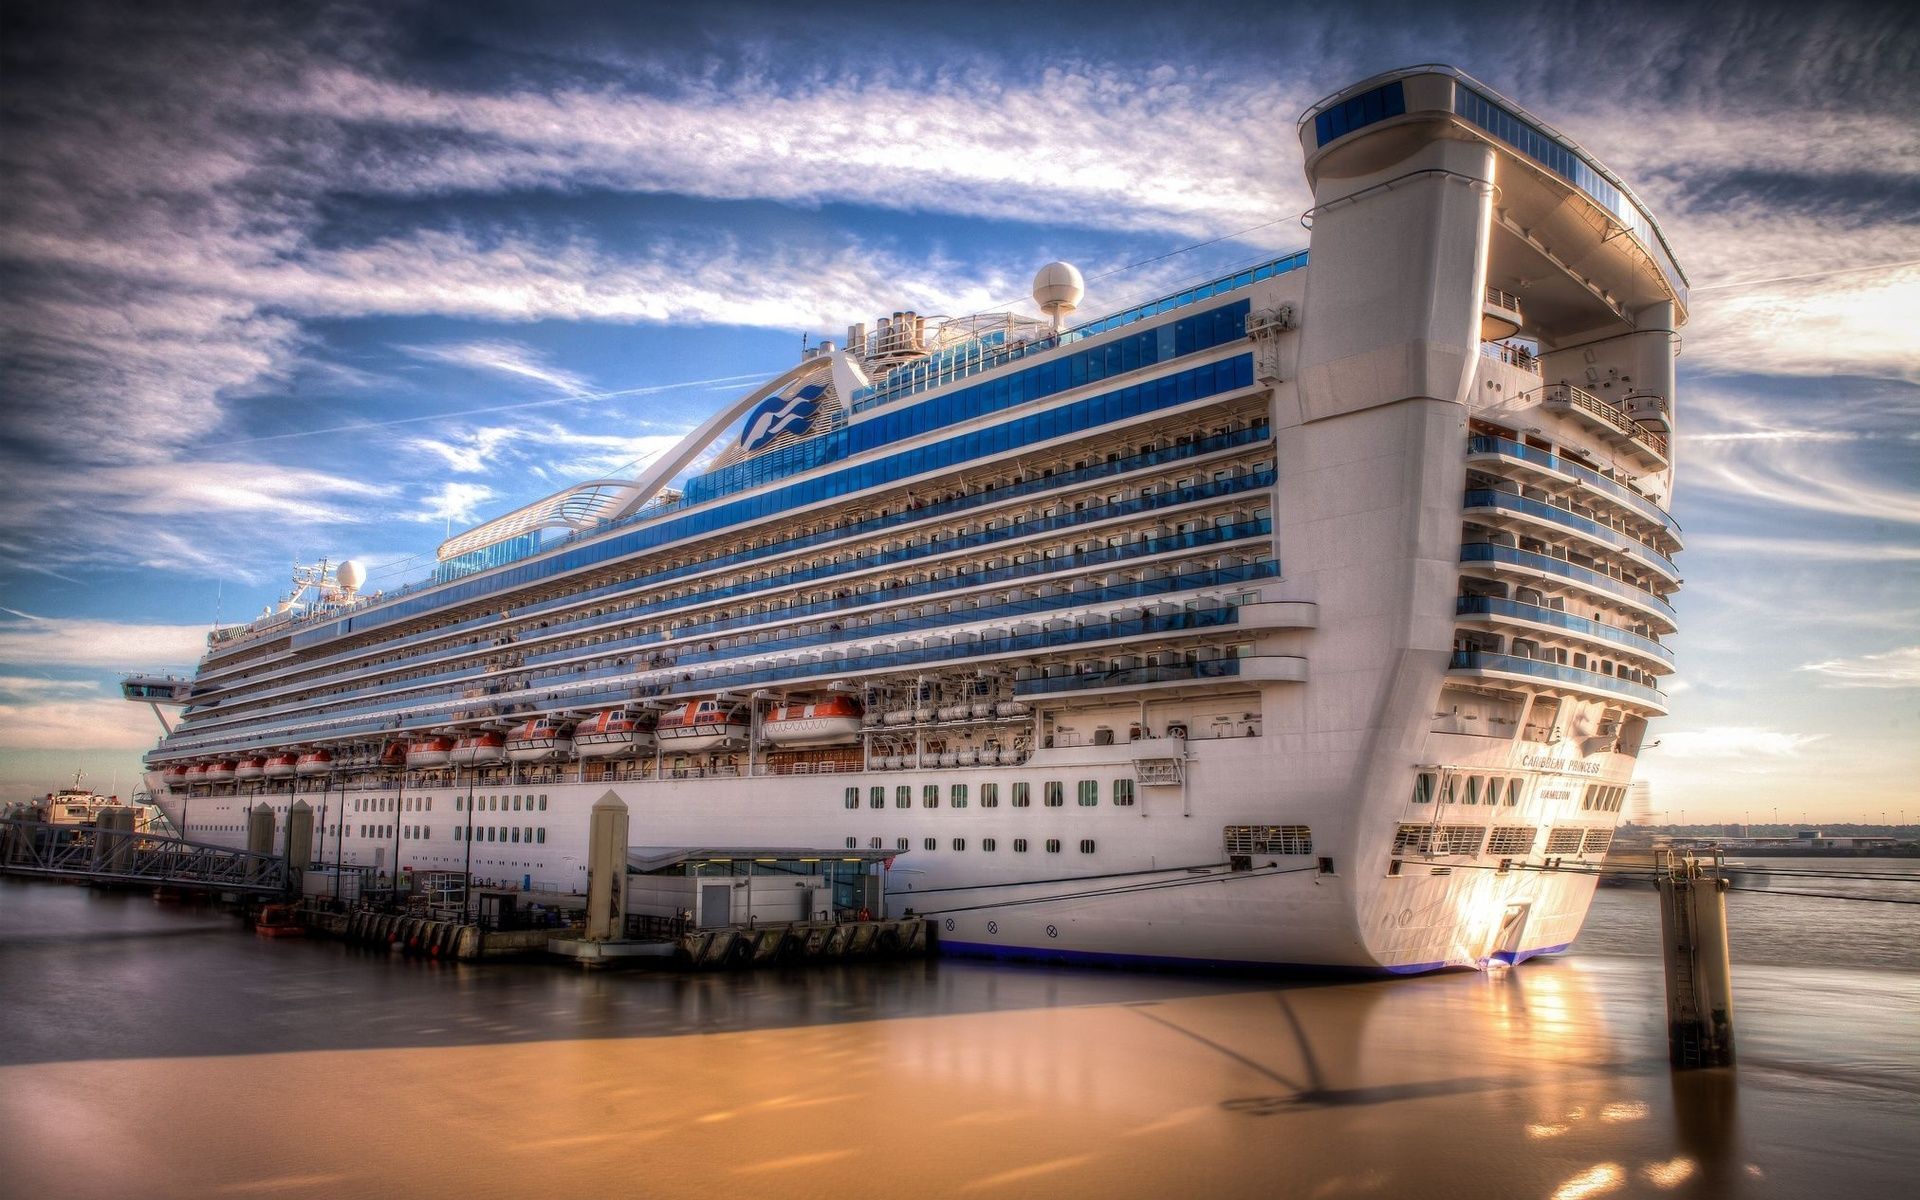 Download Cool Cruise Ship Wallpaper 8916 1920x1200 px High ...